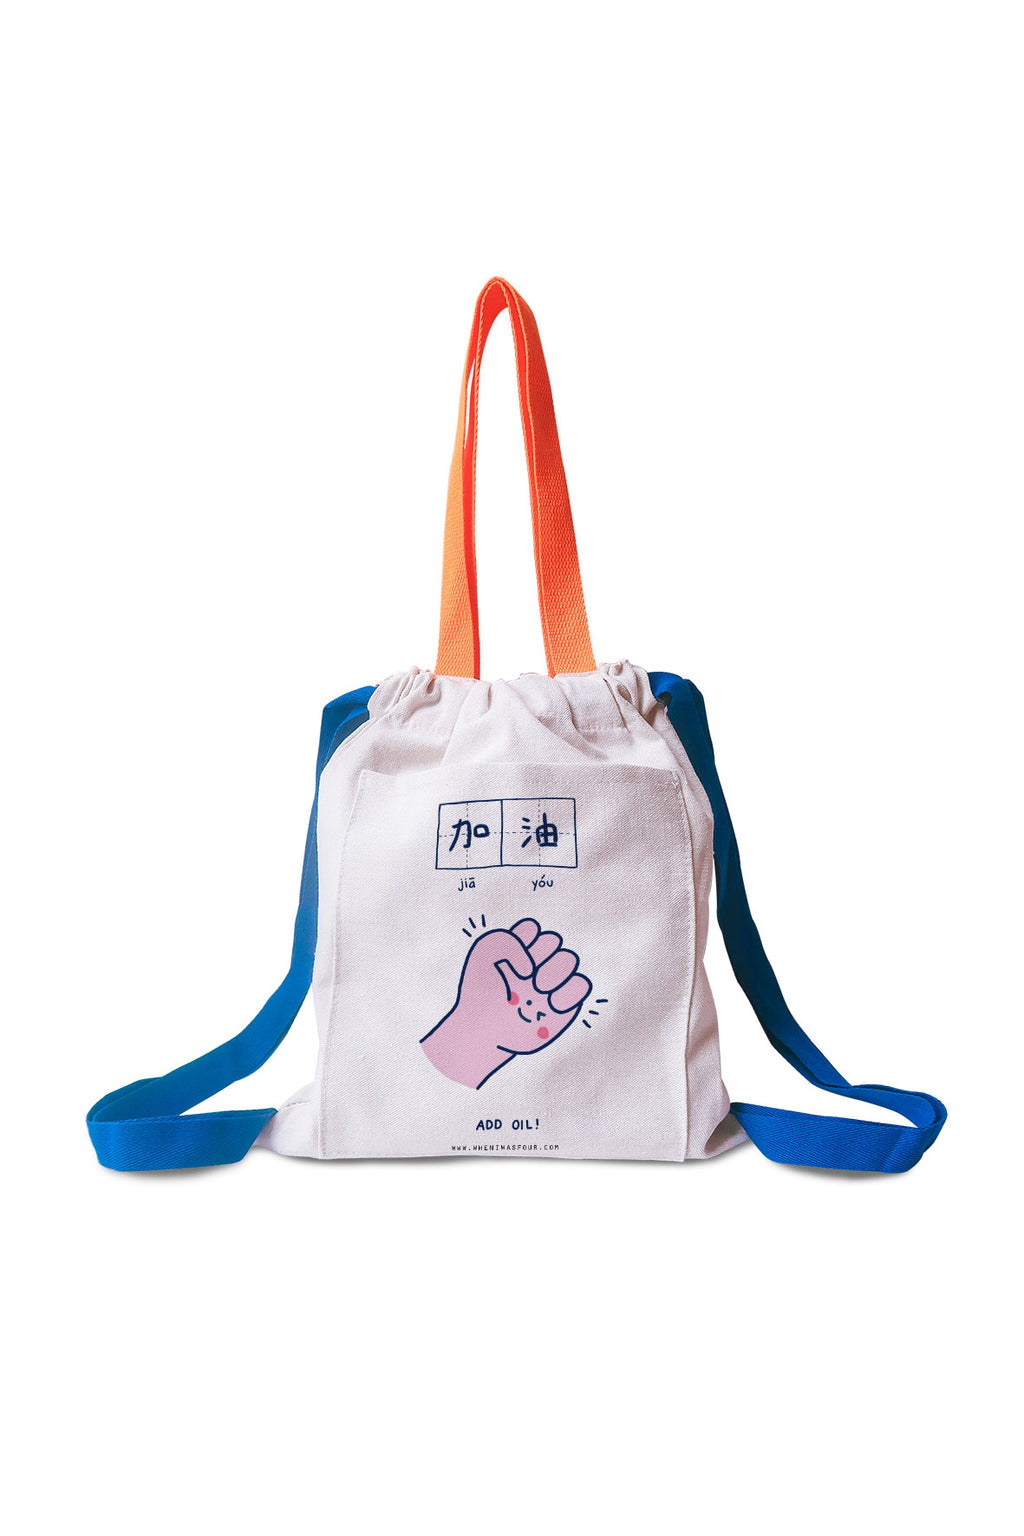 Jia You Kids Backpack - Backpack by wheniwasfour | 小时候, Singapore local artist online gift store